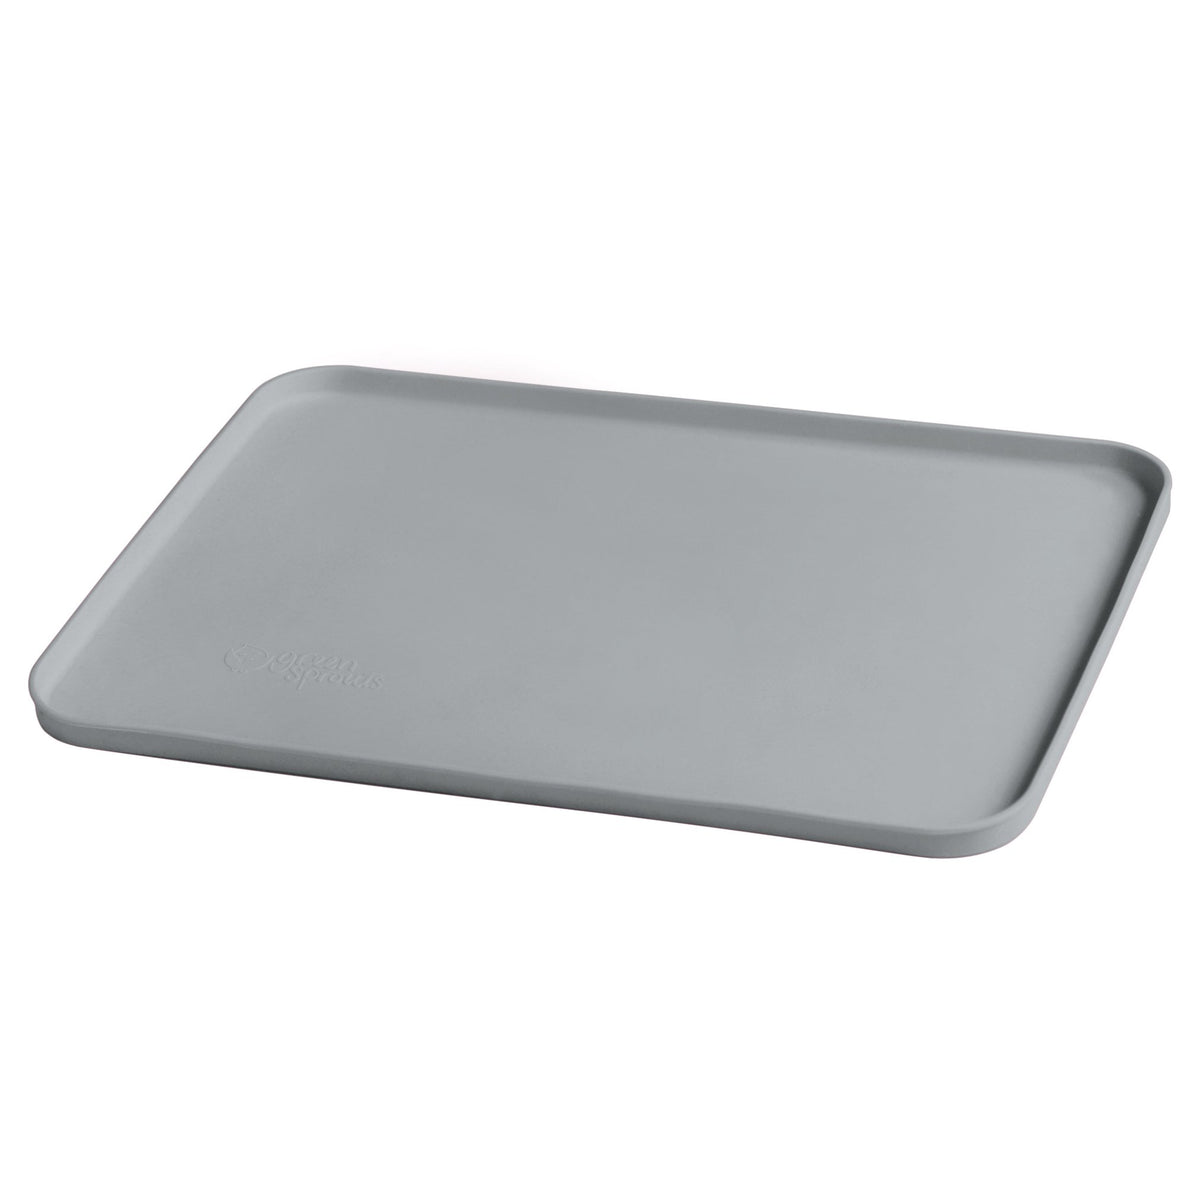 SILICONE TABLE MAT - Planet Nails Shopping Cart